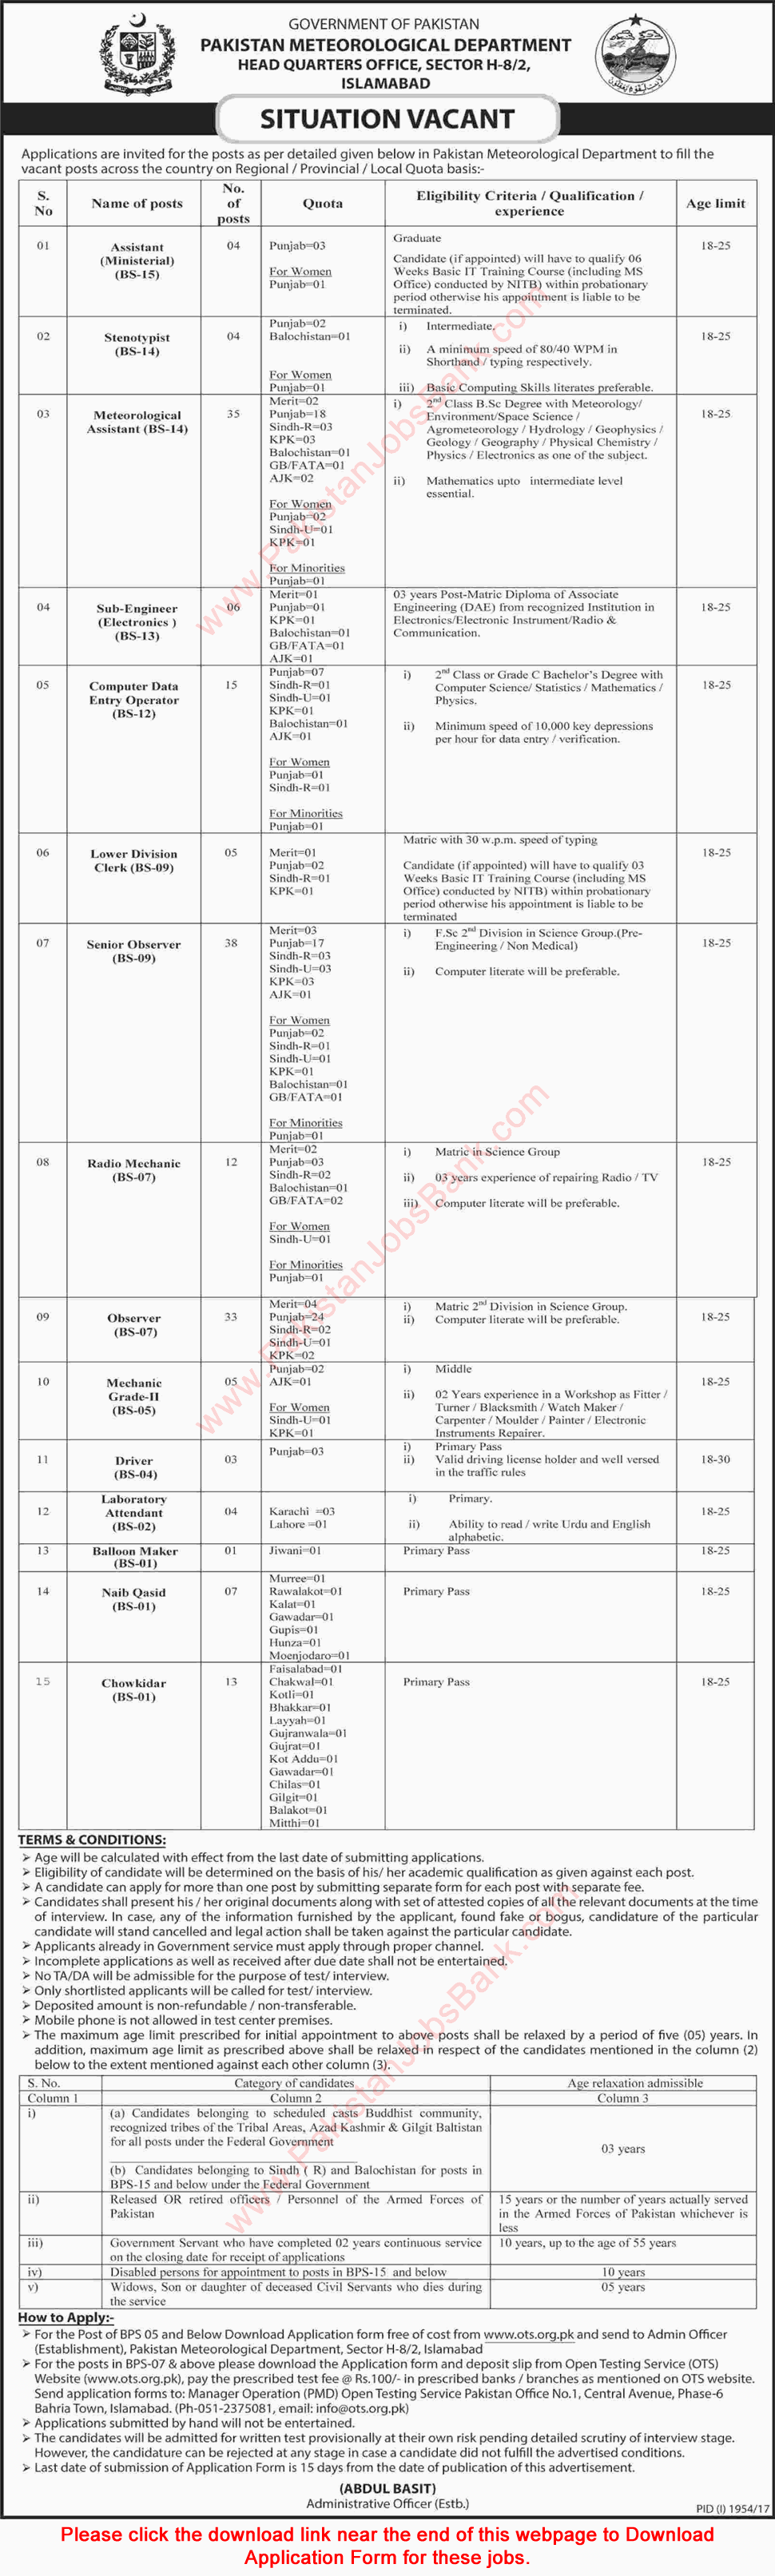 Pakistan Meteorological Department Jobs 2017 October Islamabad OTS Application Form Download Latest